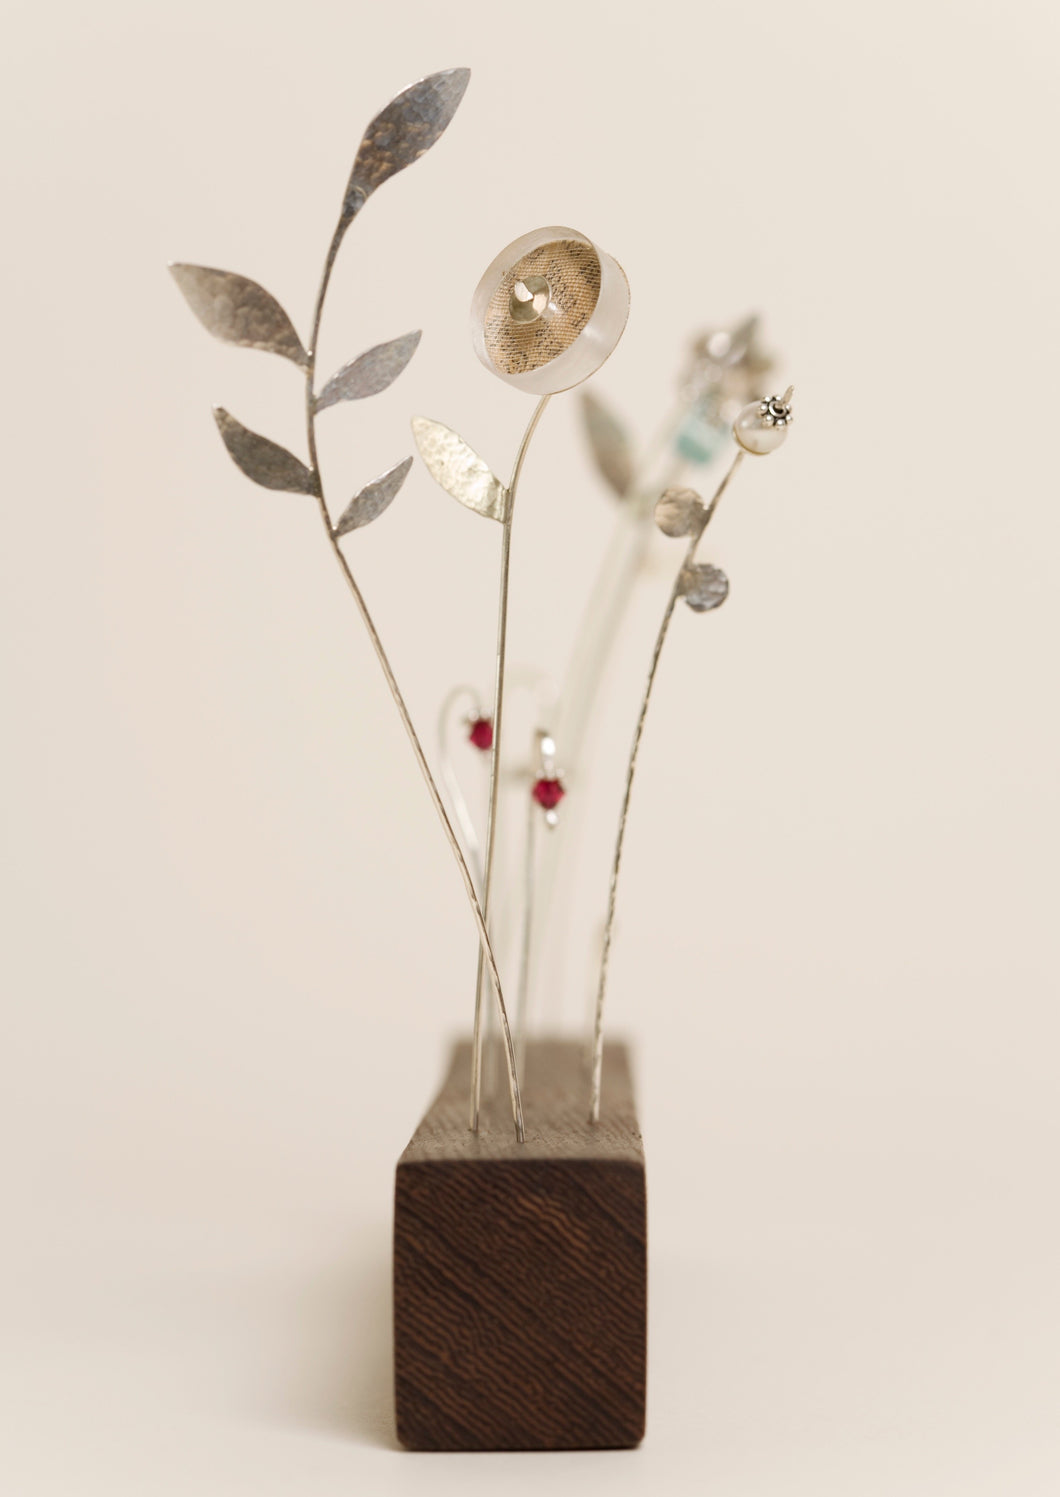 ¨Garden of Delights¨Micro-Sculpture with Wearable Pins